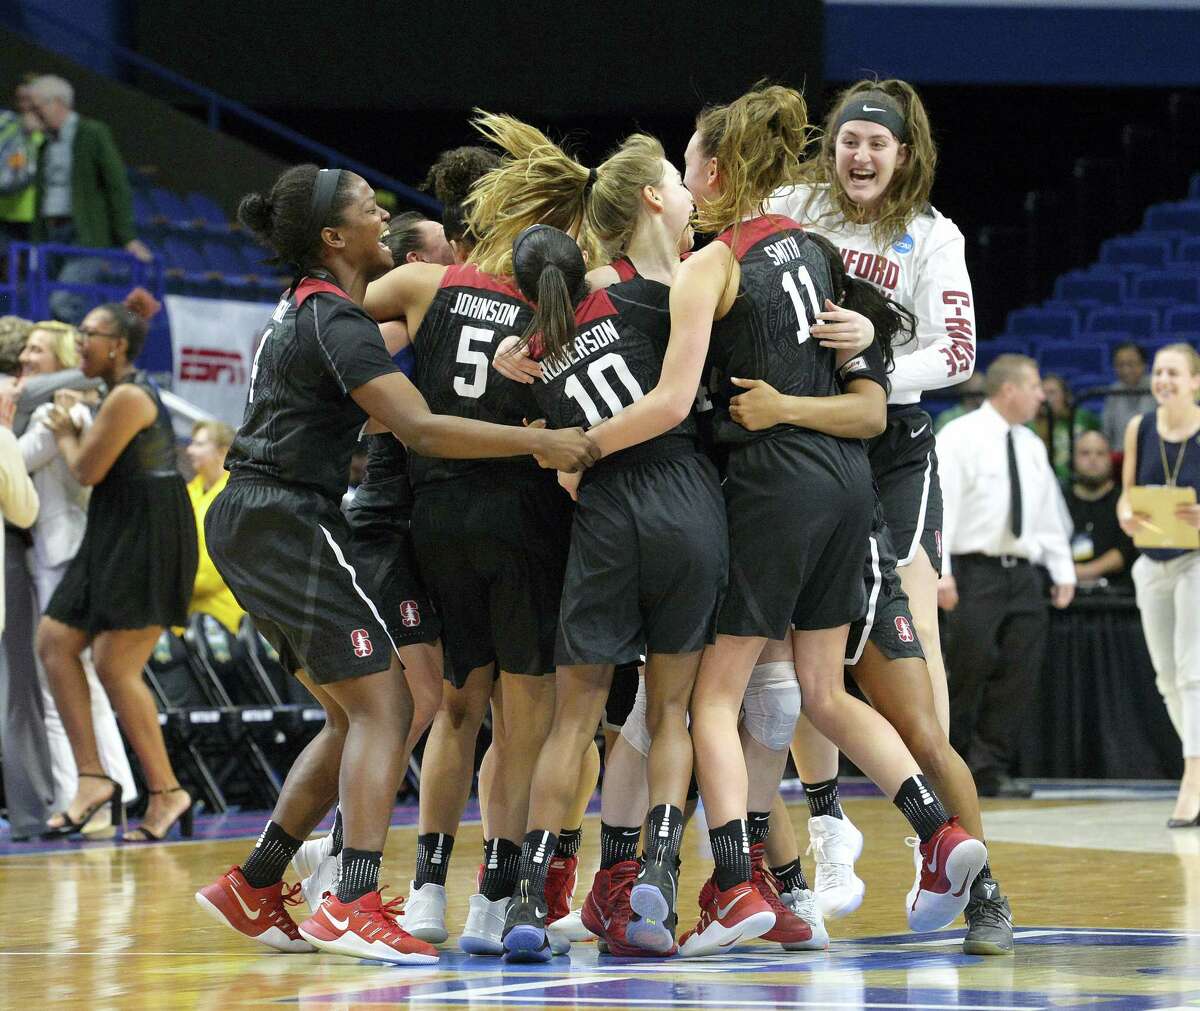 Members of the Stanford women’s team celebrate after defeating Notre Dame to advance to the Final Four on Sunday.